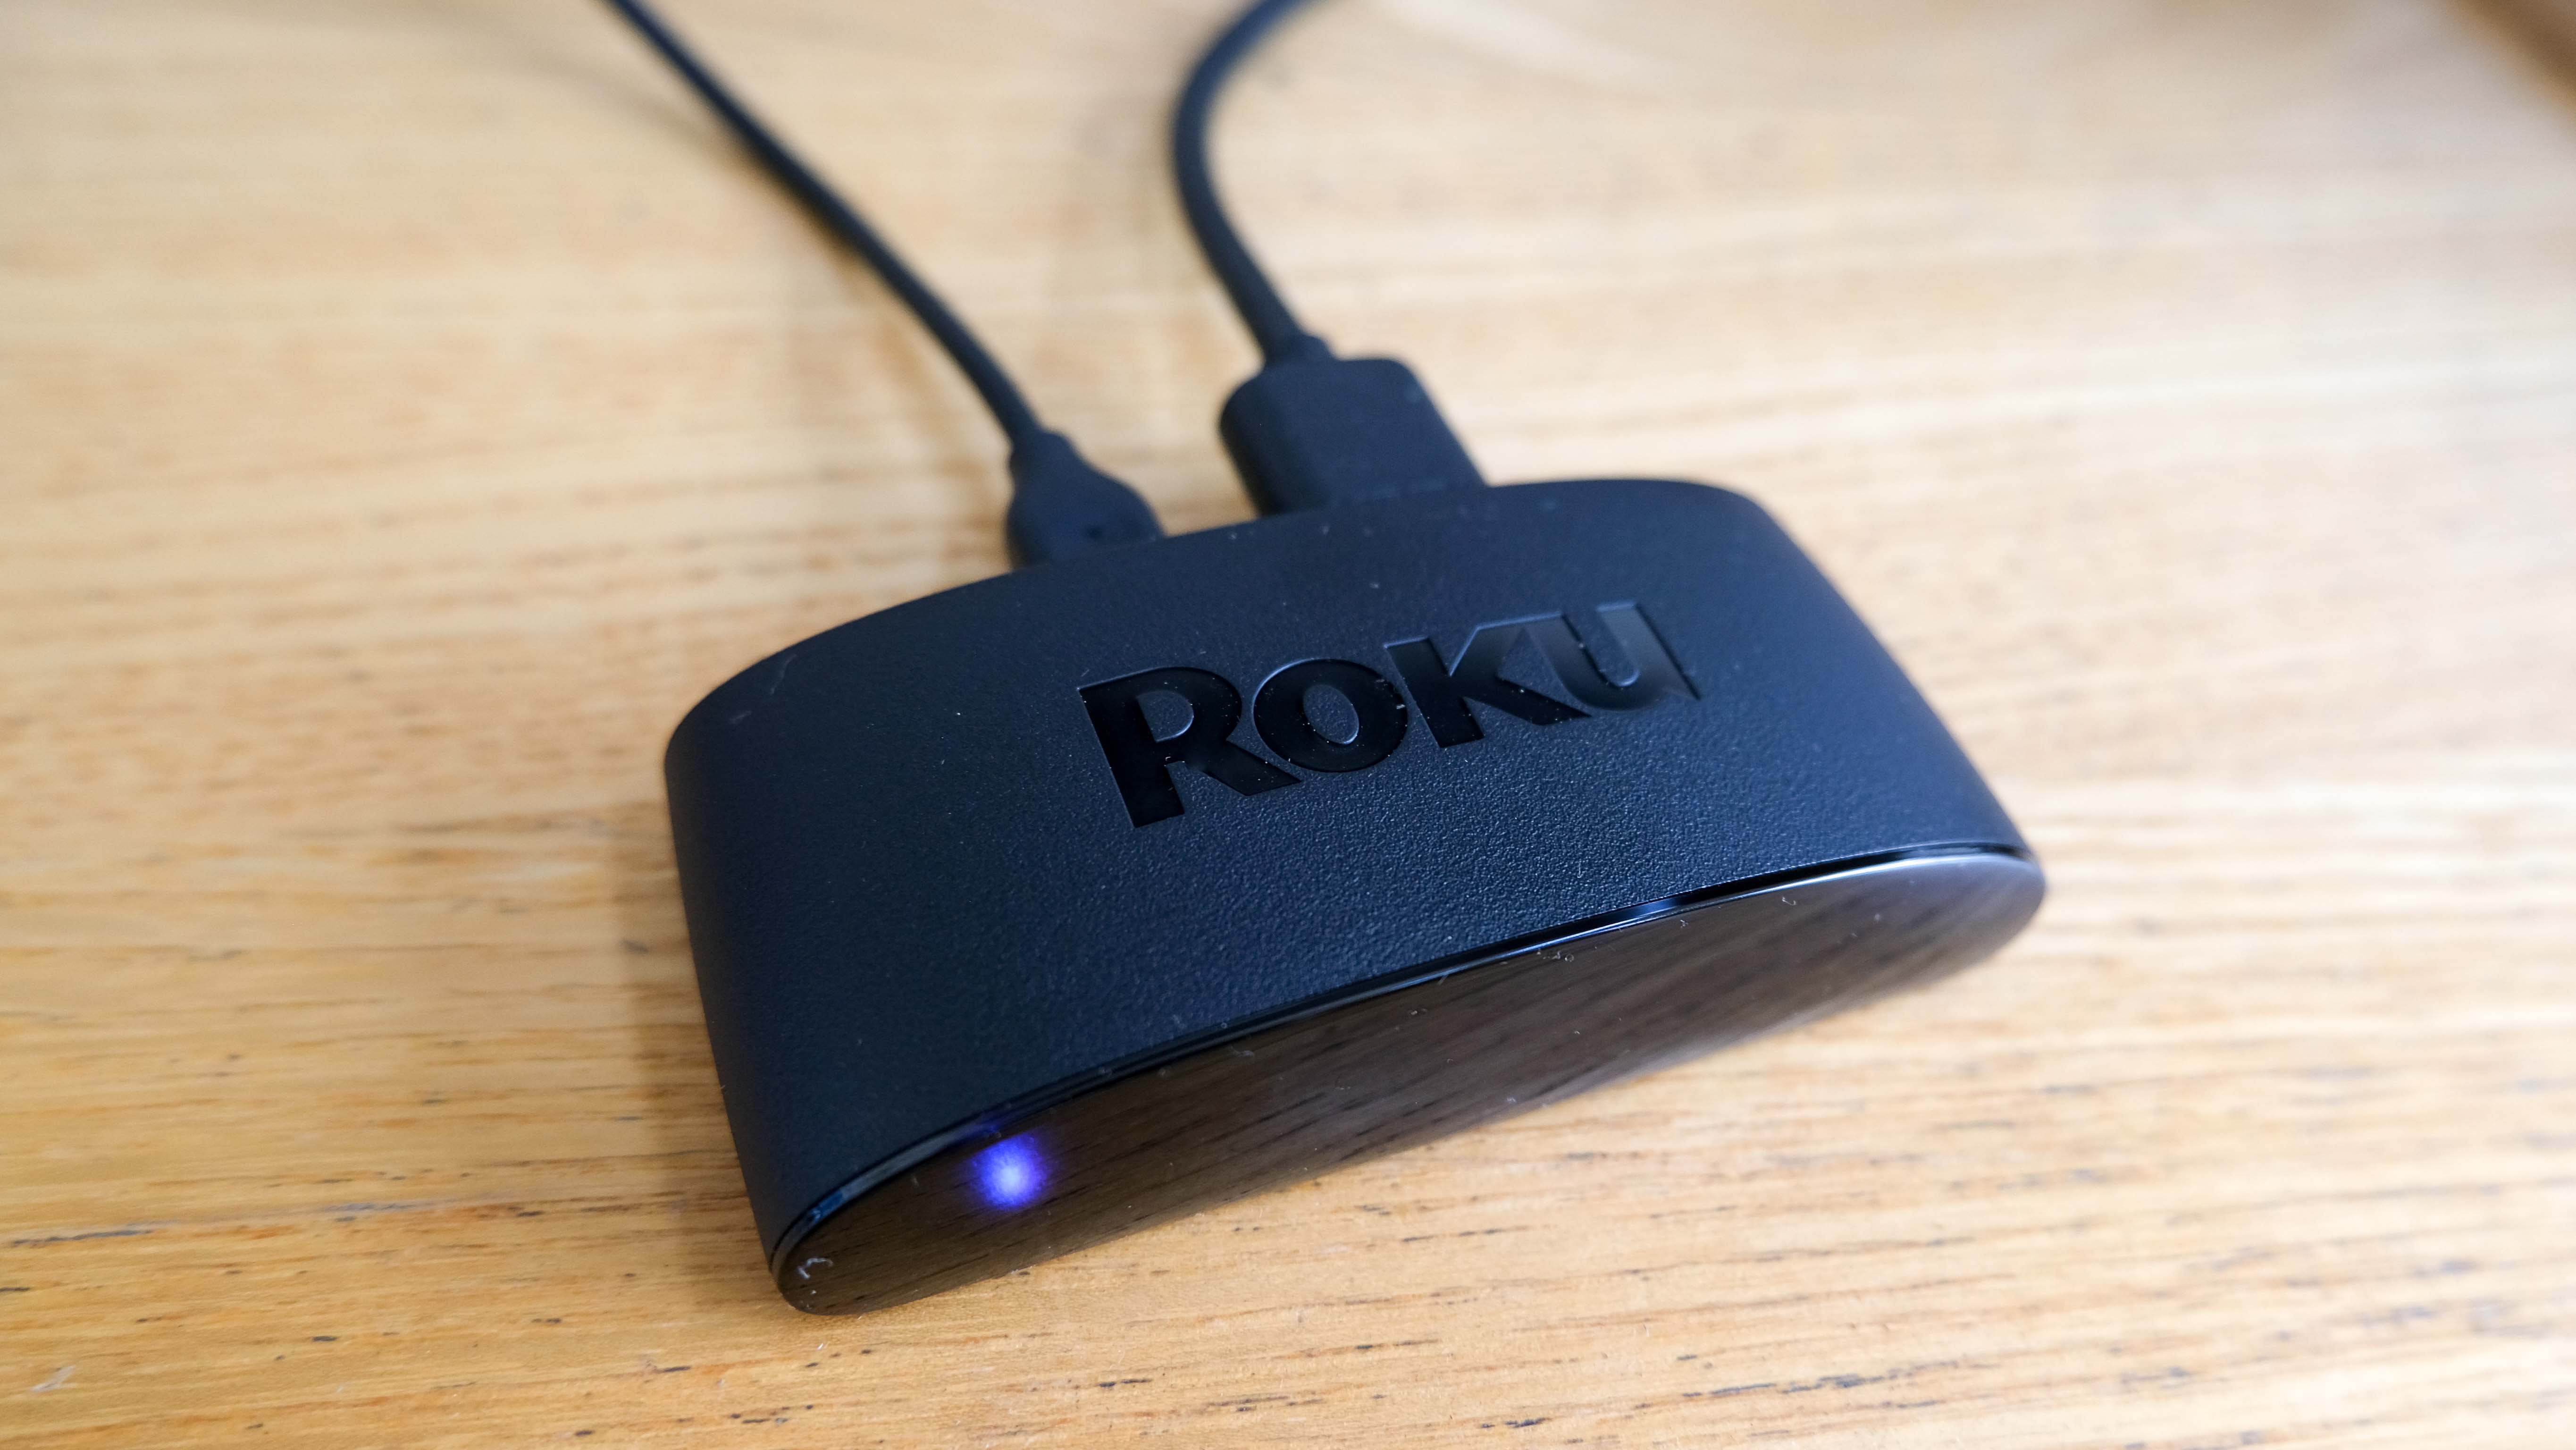 The Roku Express 4K Plus, turned on and plugged in, on a wooden surface, is one of the Best Roku Devices.